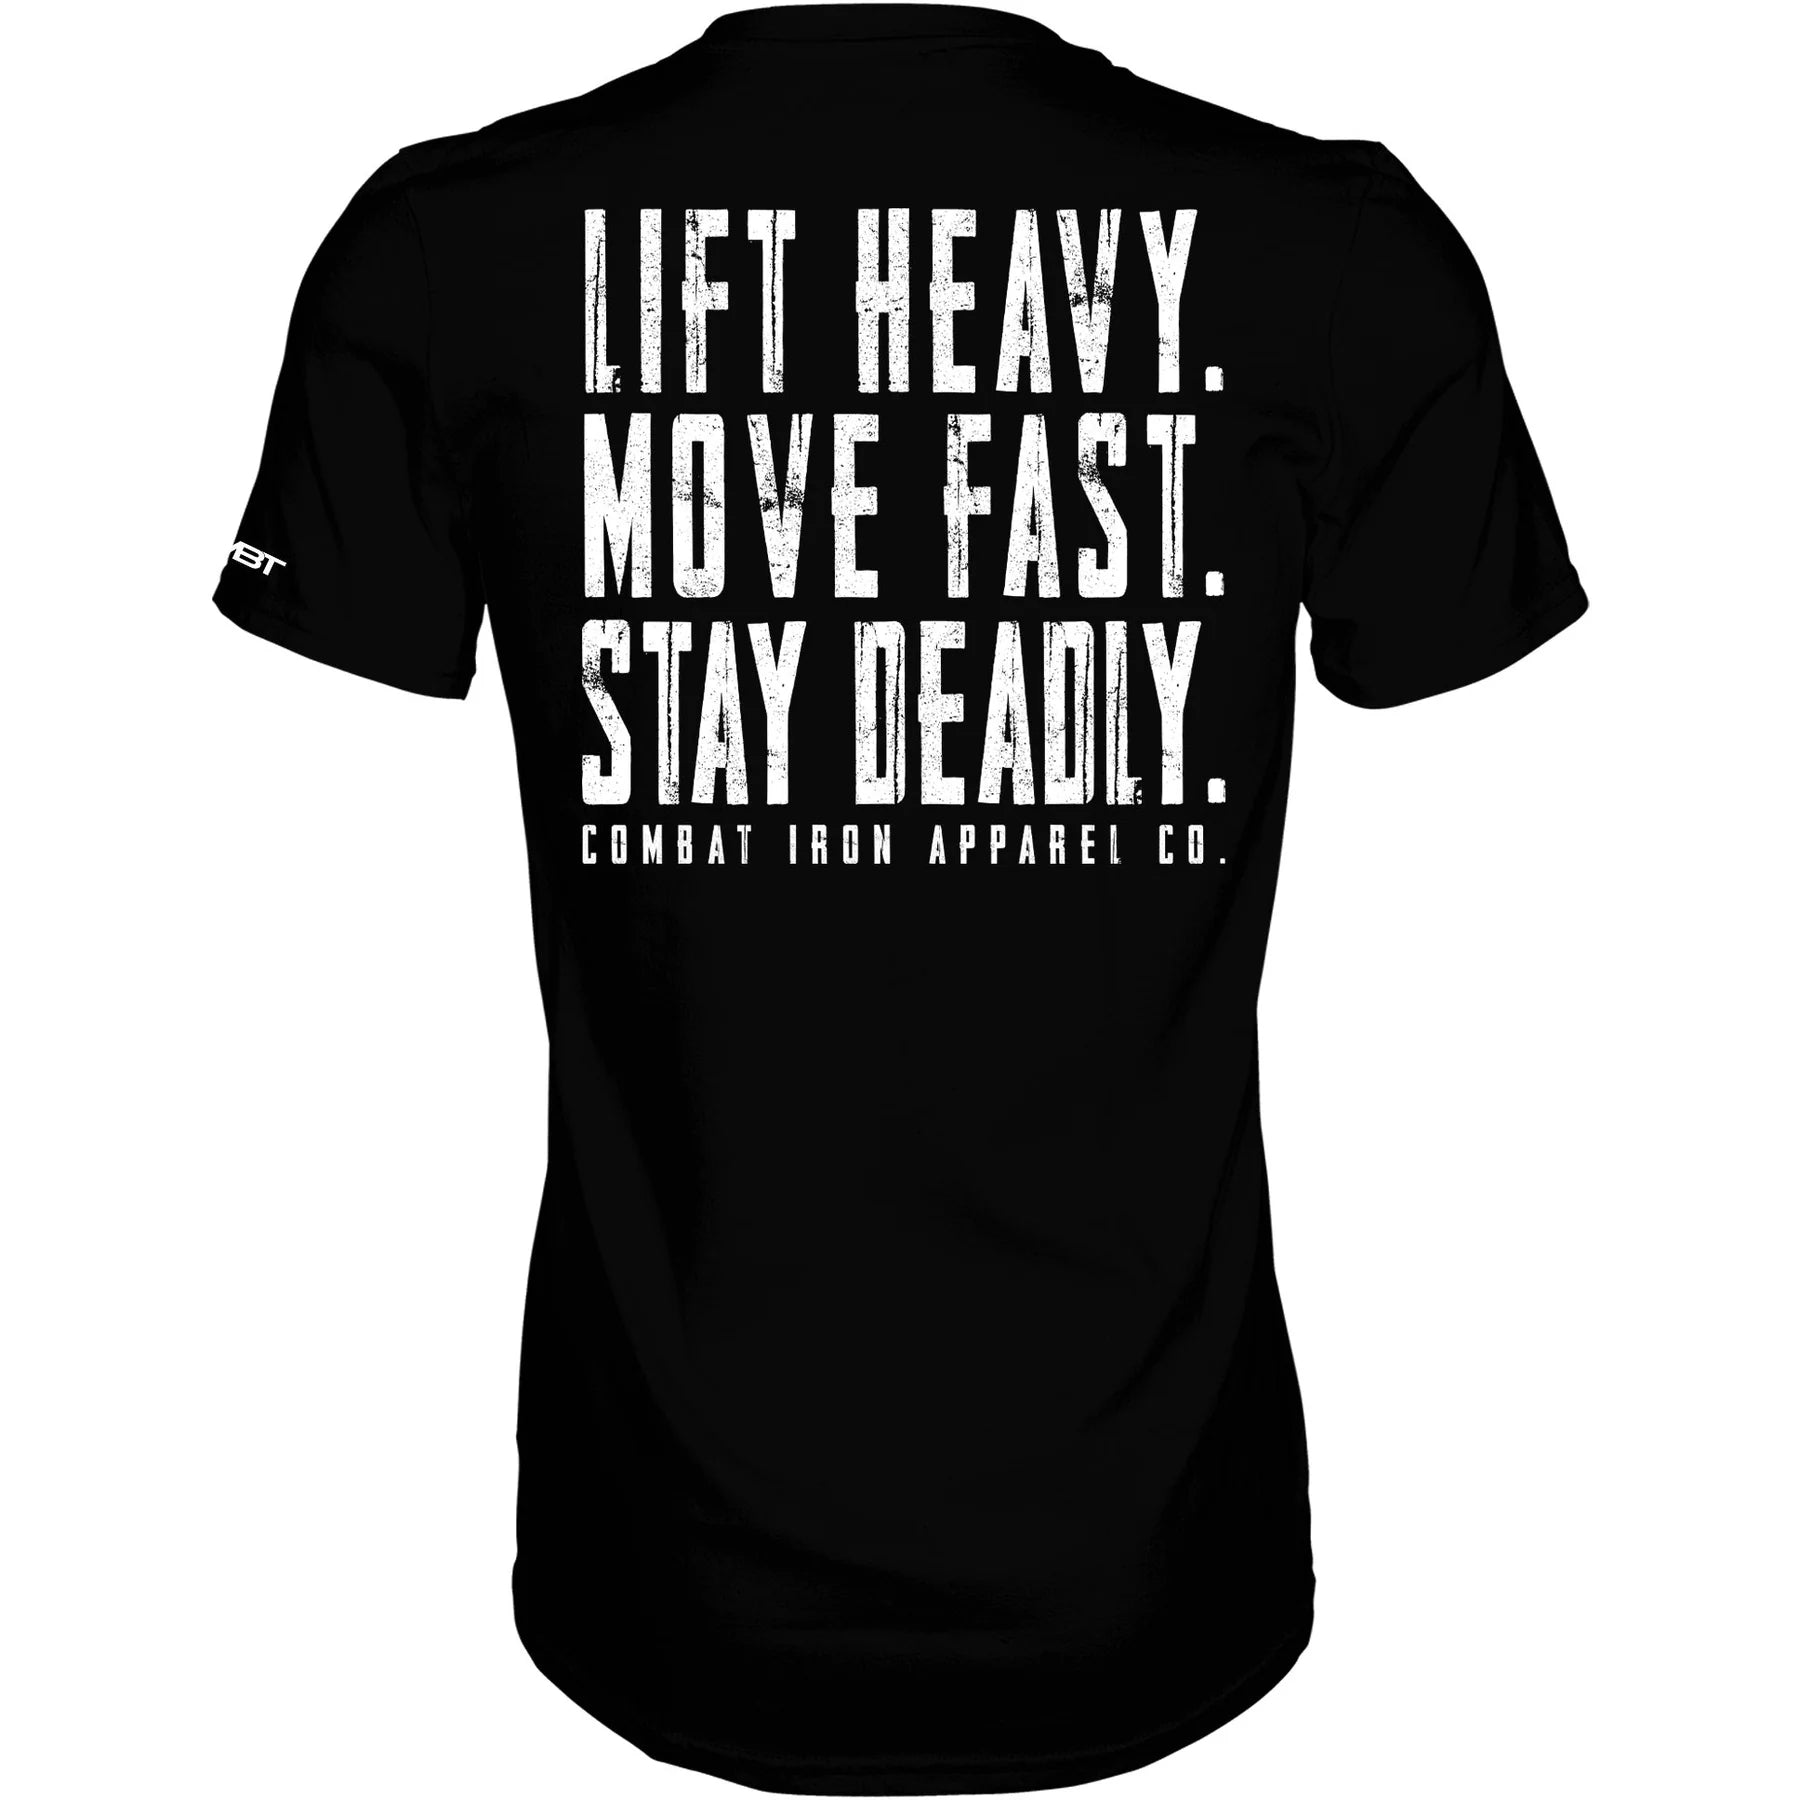 Lift Heavy. Move Fast. Stay Deadly.